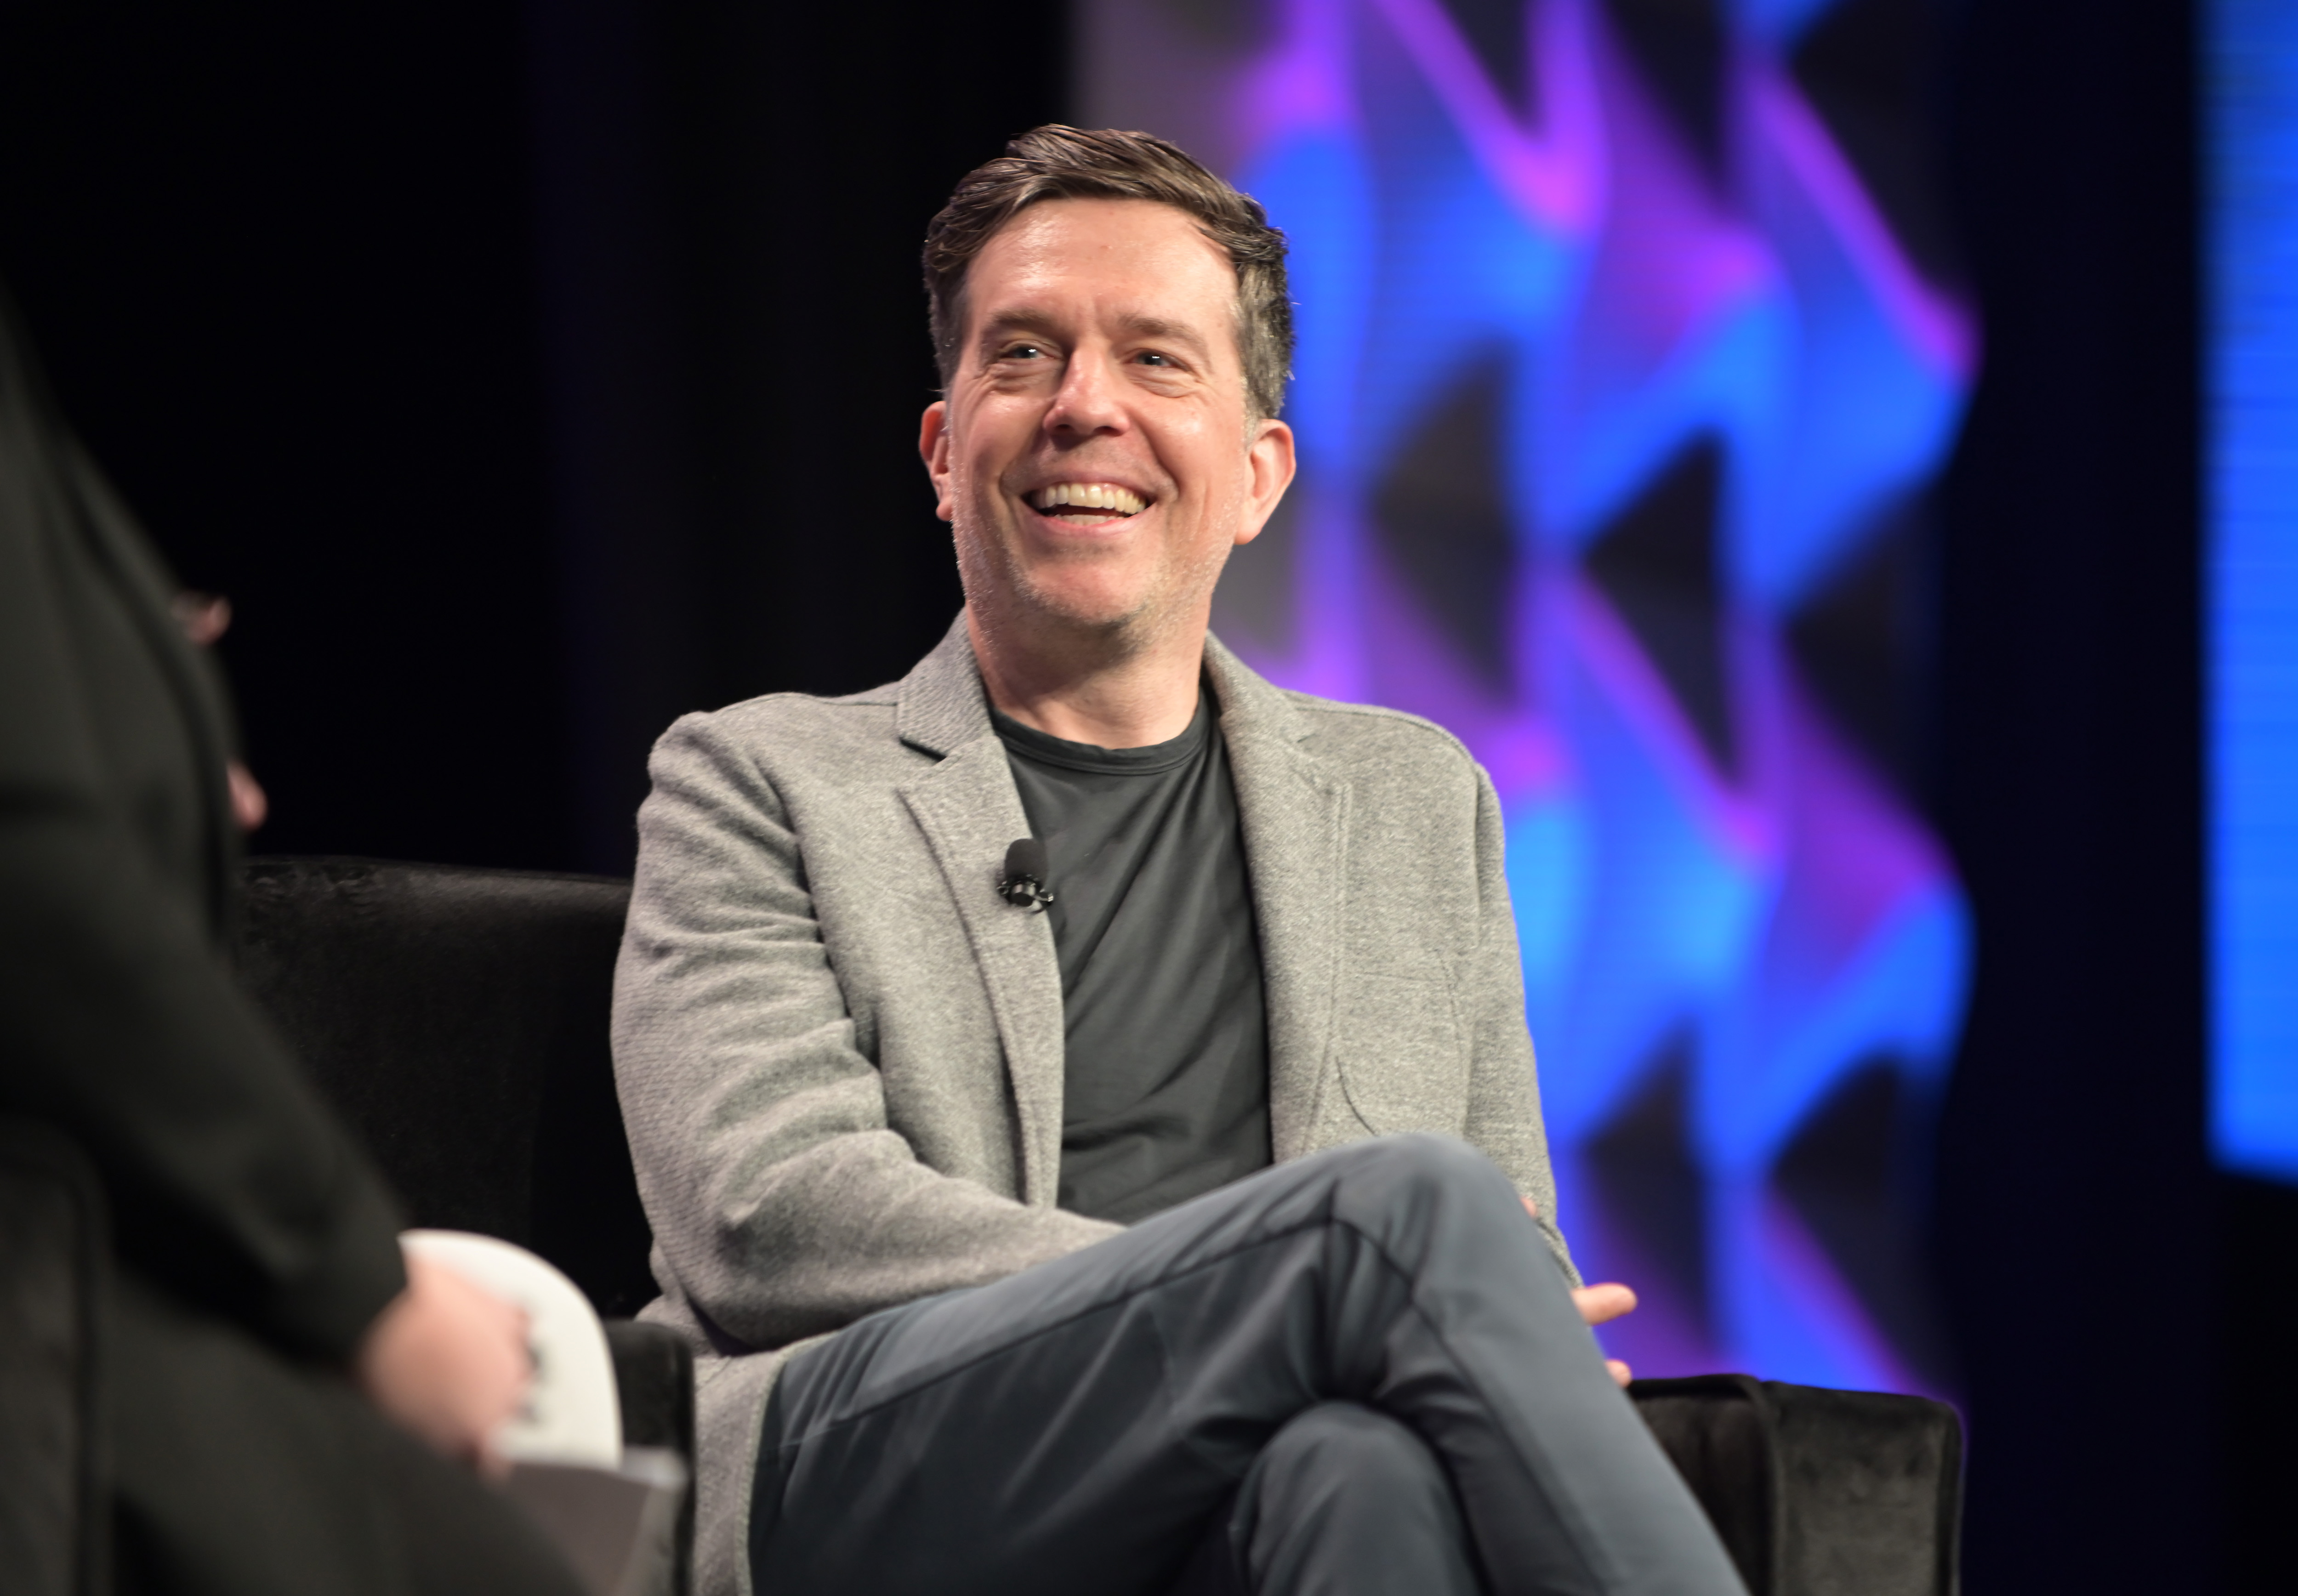 Ed Helms during the 2023 SXSW Conference and Festivals on March 11, 2023, in Austin, Texas. | Source: Getty Images